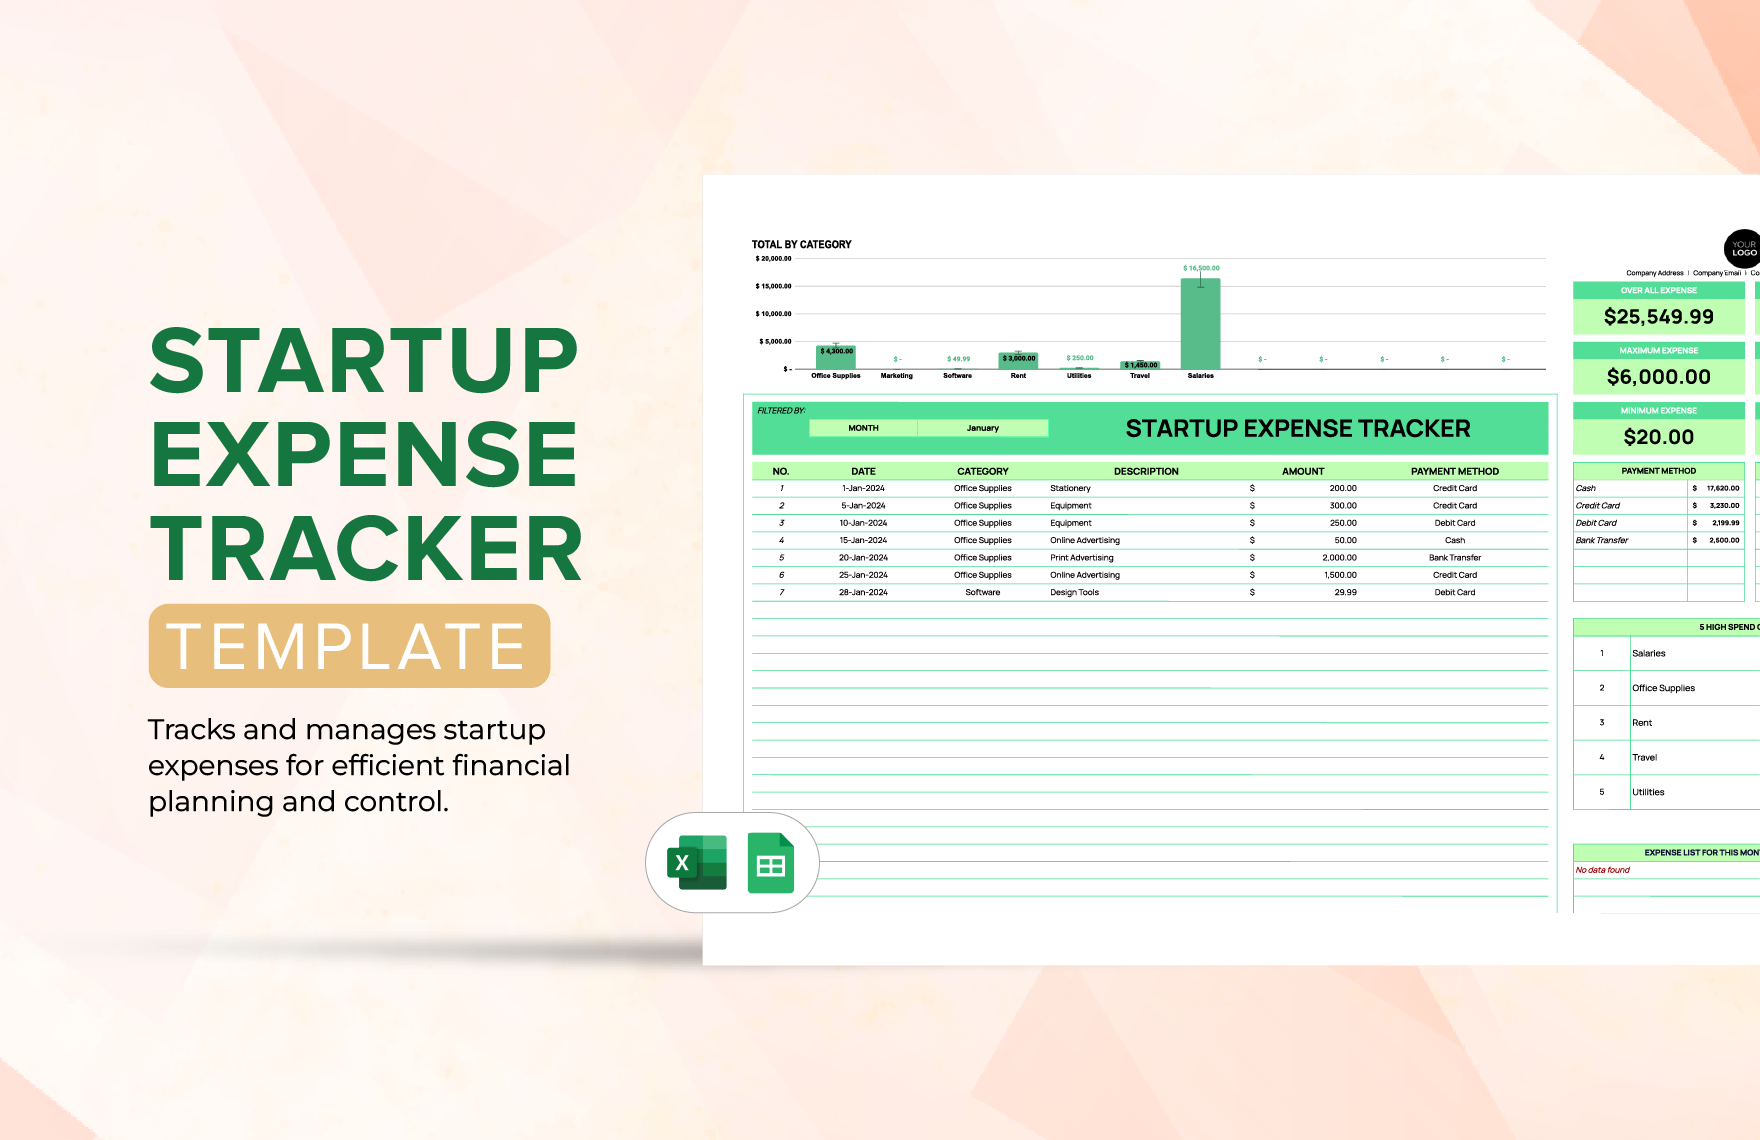 Startup Expense Tracker Template in Excel, Google Sheets